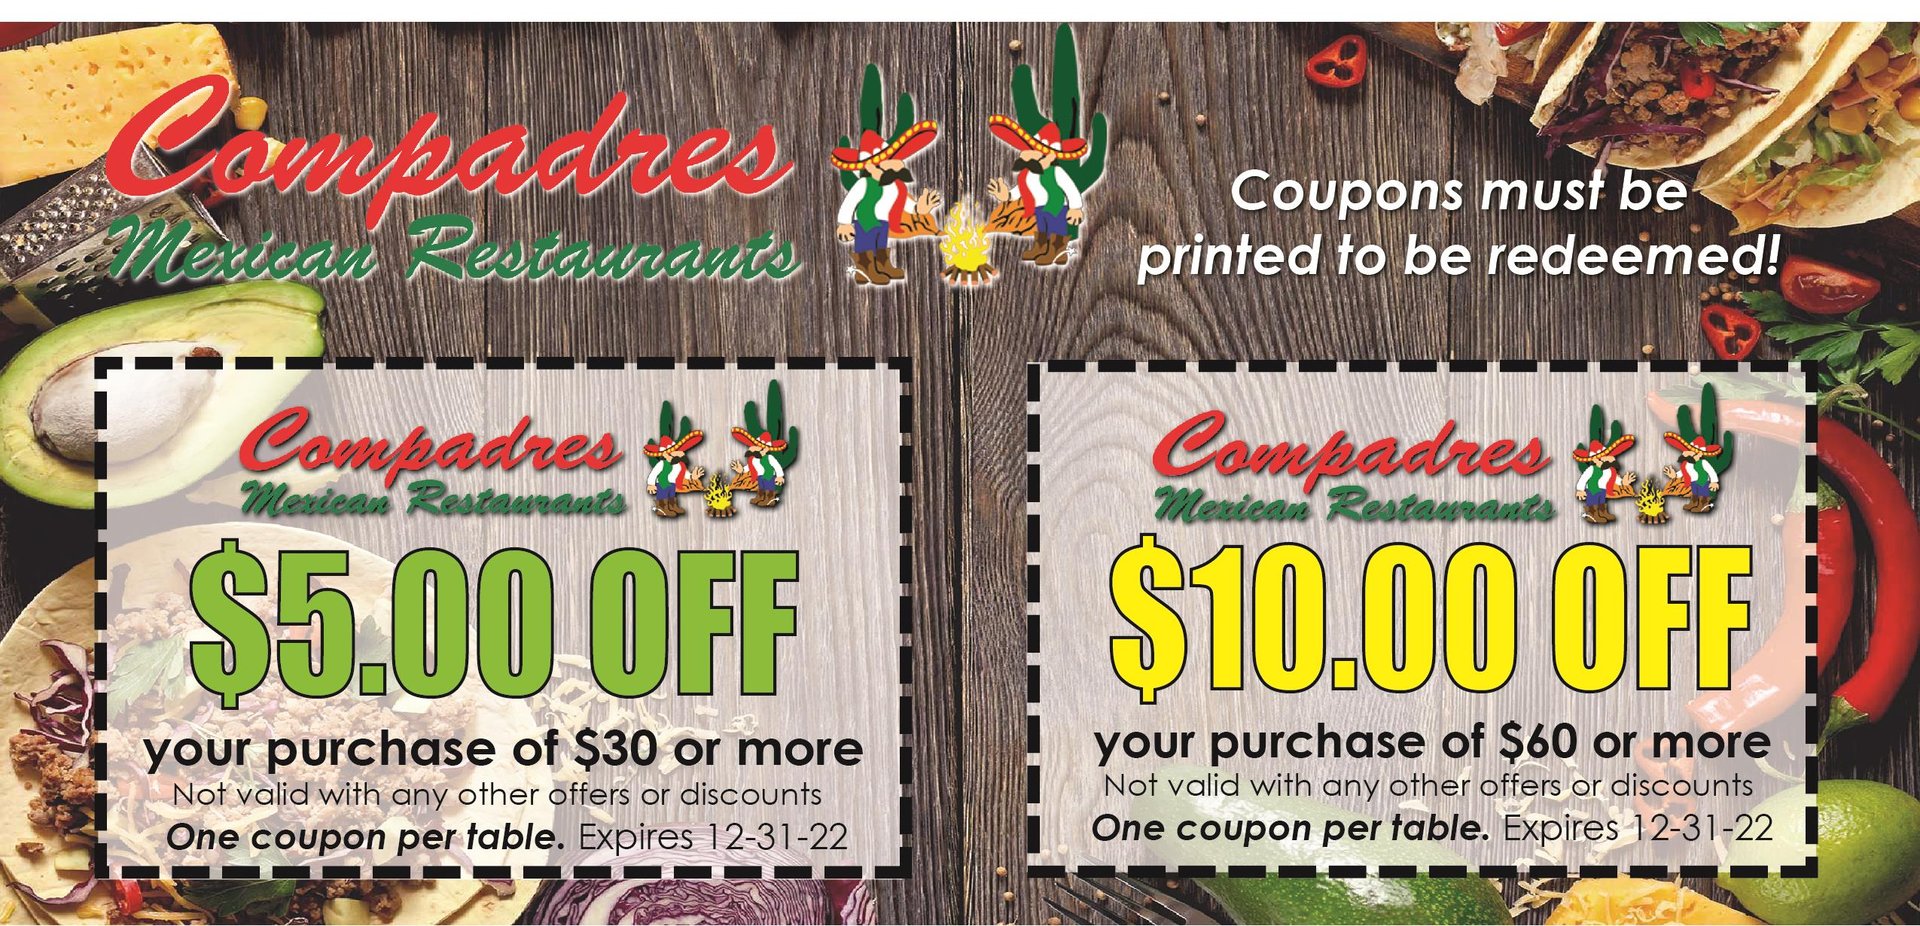 Discounted Mexican food deals